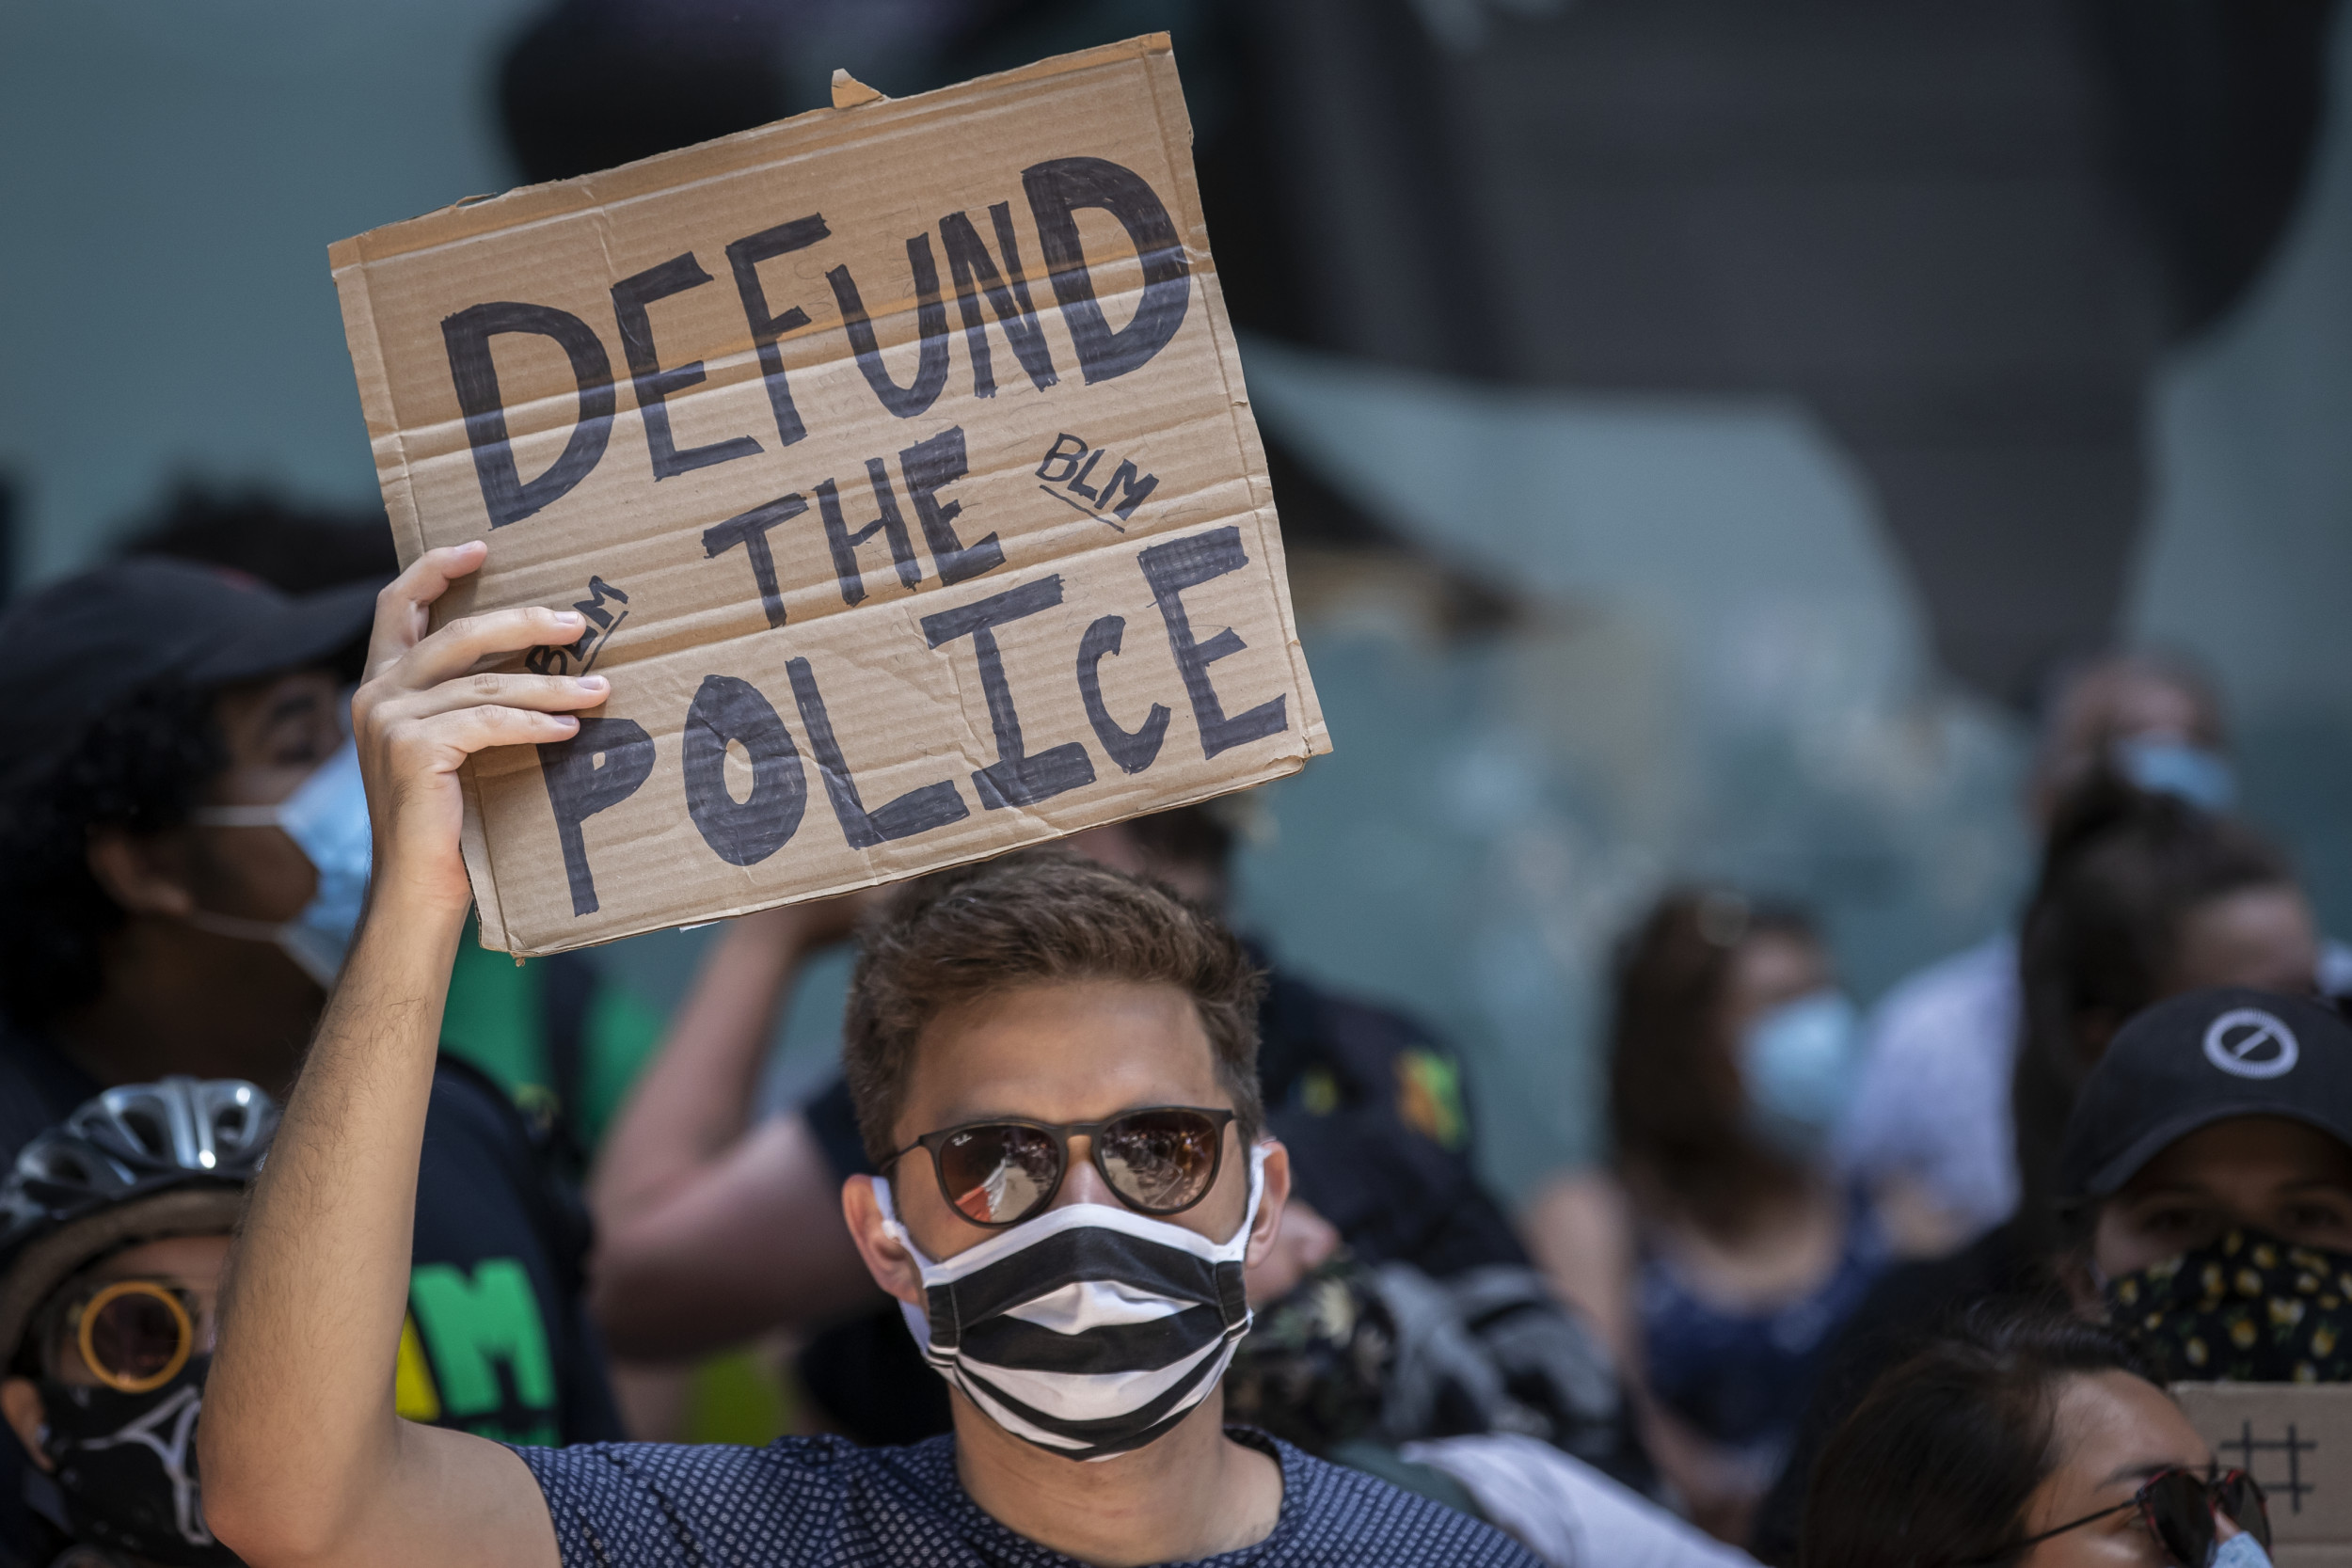 Majority Of Americans Oppose Cuts To Police Department Funding